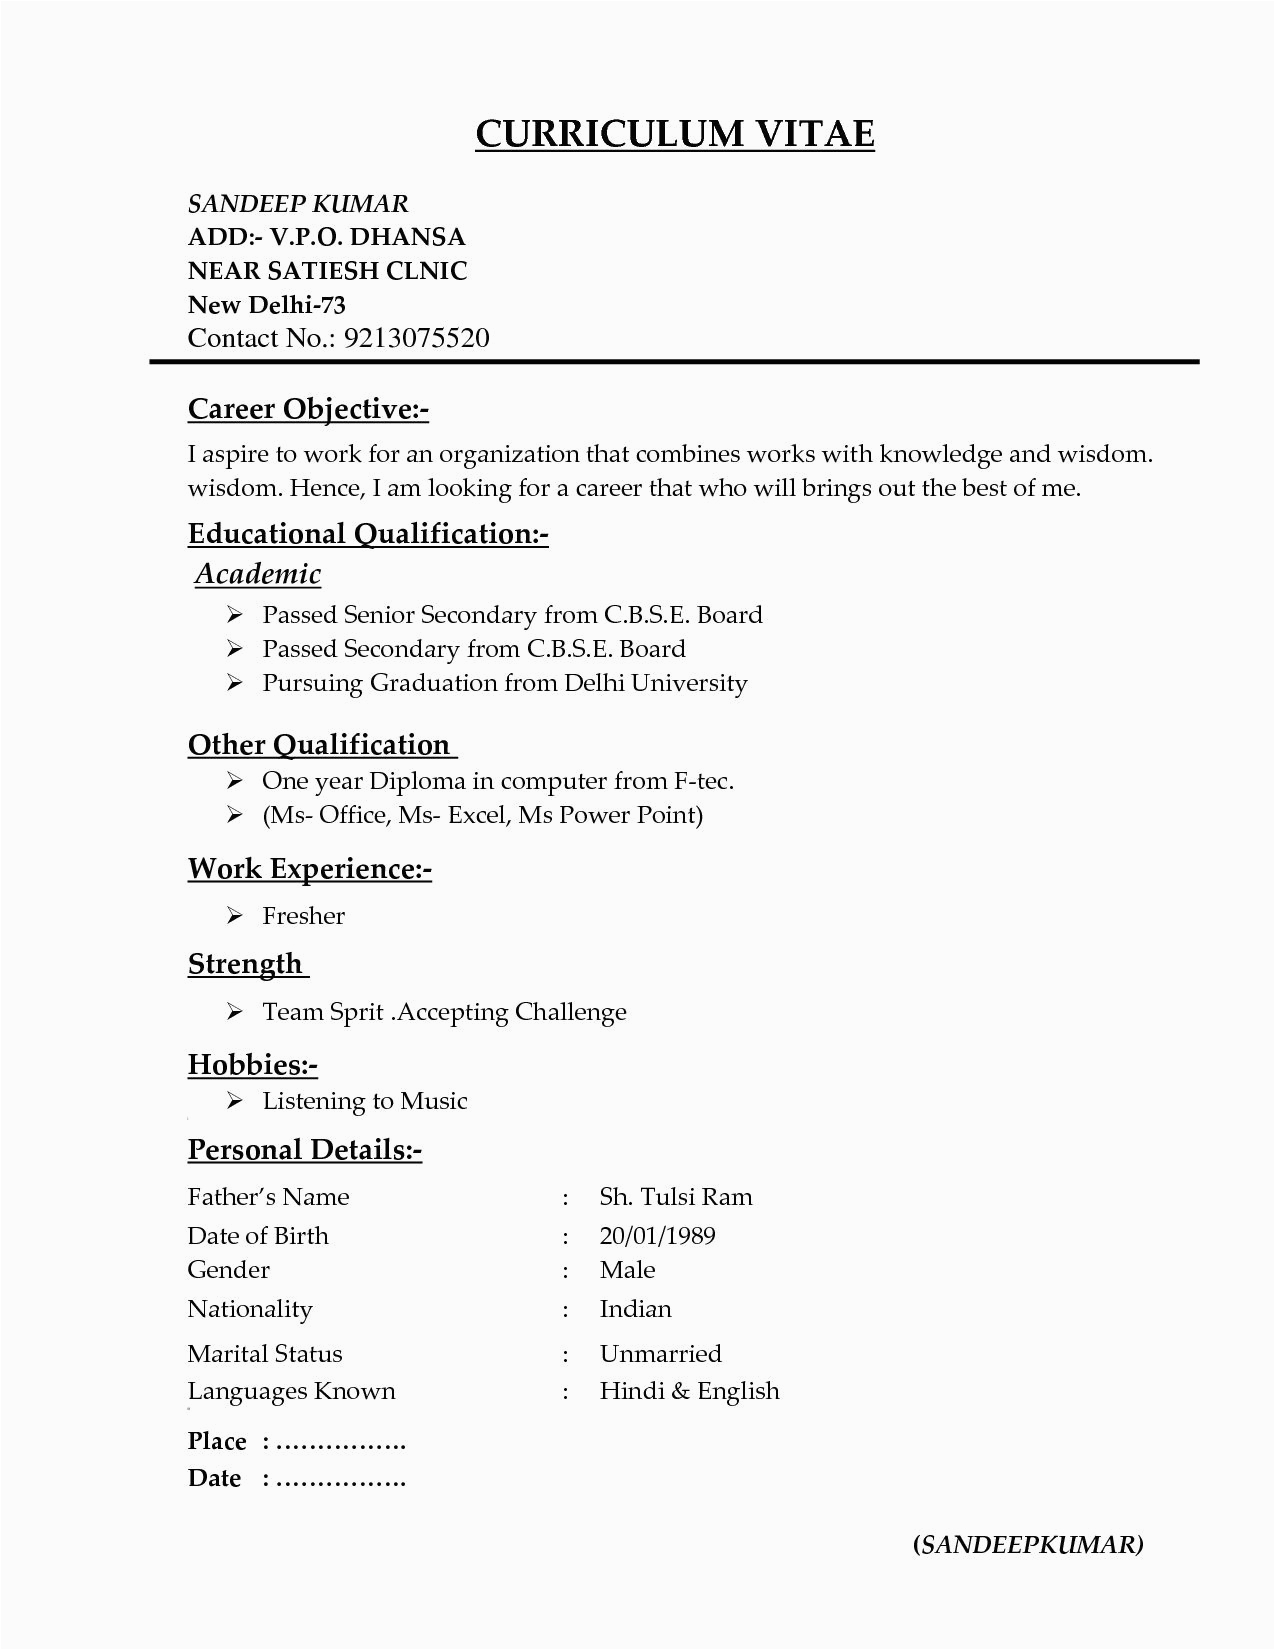 Resume Sample for Rn with No Experience 2023 Resume Summary Examples for Freshers